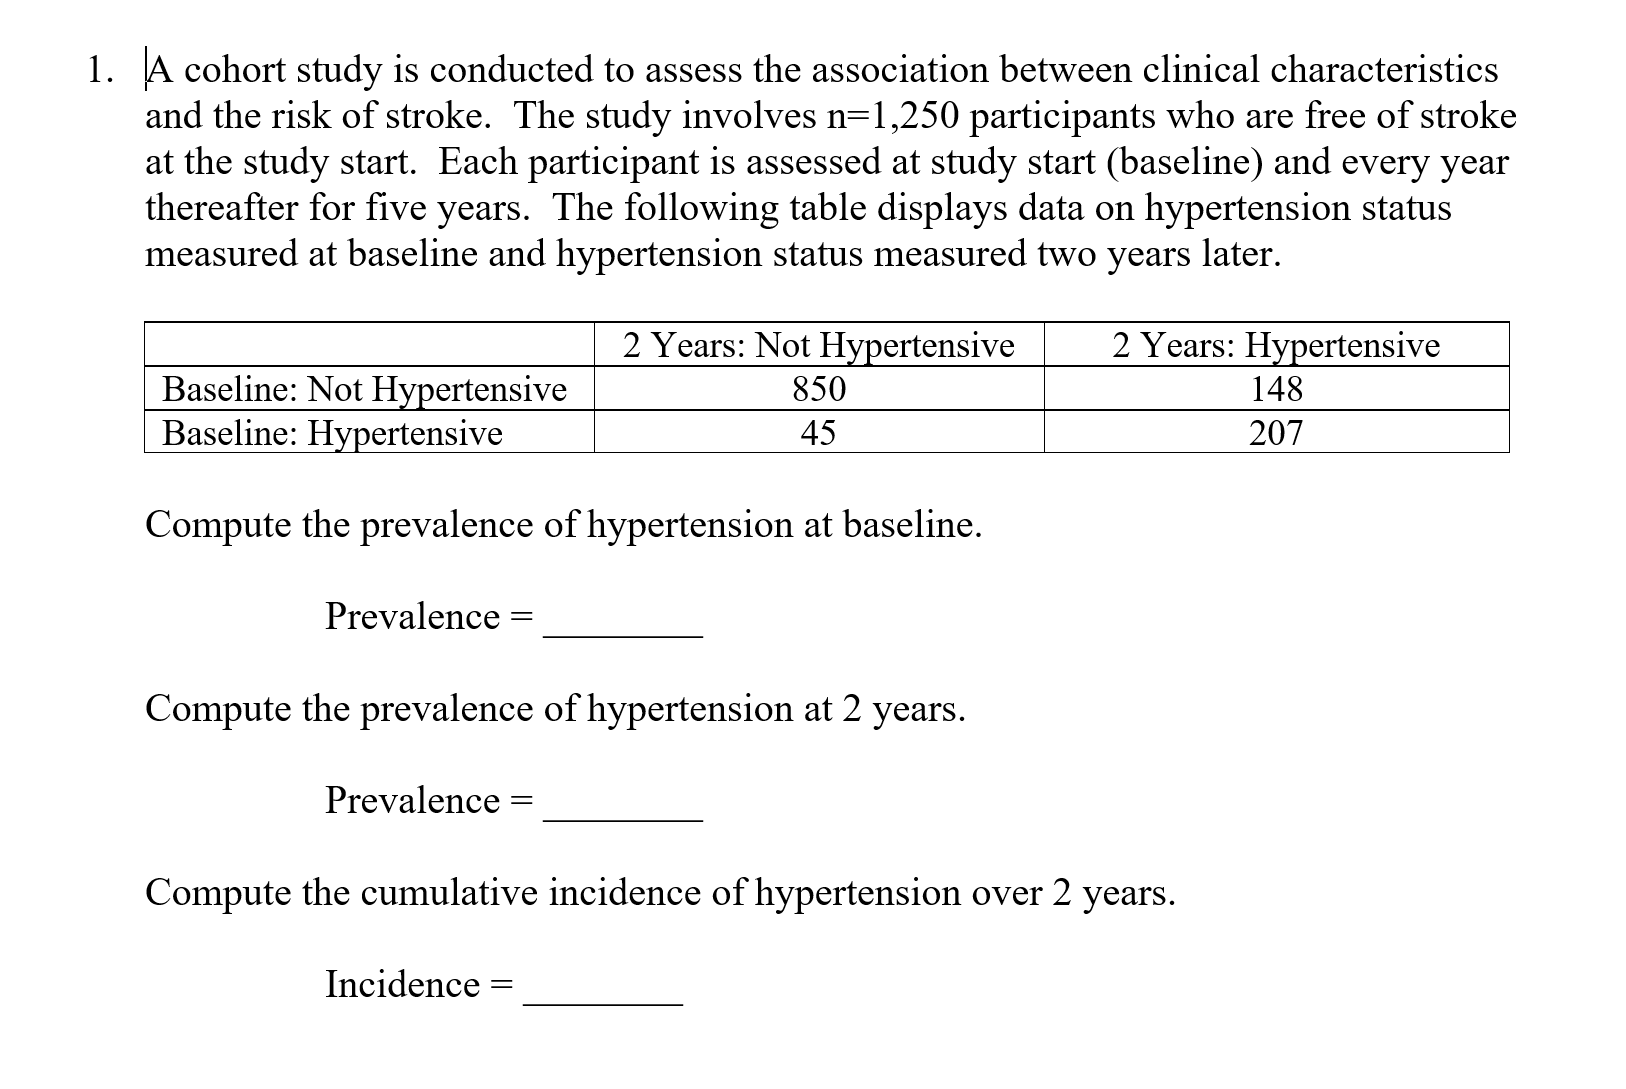 A cohort study is conducted to assess the association between clinical characteristic
and the risk of stroke. The study involves n-1,250 participants who are free of stroke
at the study start. Each participant is assessed at study start (baseline) and every year
thereafter for five years. The following table displays data on hypertension status
measured at baseline and hypertension status measured two years later.
1.
s
2 Years: Not Hvpertensive
850
45
2 Years: Hypertensive
148
207
Baseline: Not Hvpertensive
Baseline: Hypertensive
Compute the prevalence of hypertension at baseline
Prevalence -
Compute the prevalence of hvpertension at 2 vears.
Prevalence -
Compute the cumulative incidence of hypertension over 2 years.
Incidence
